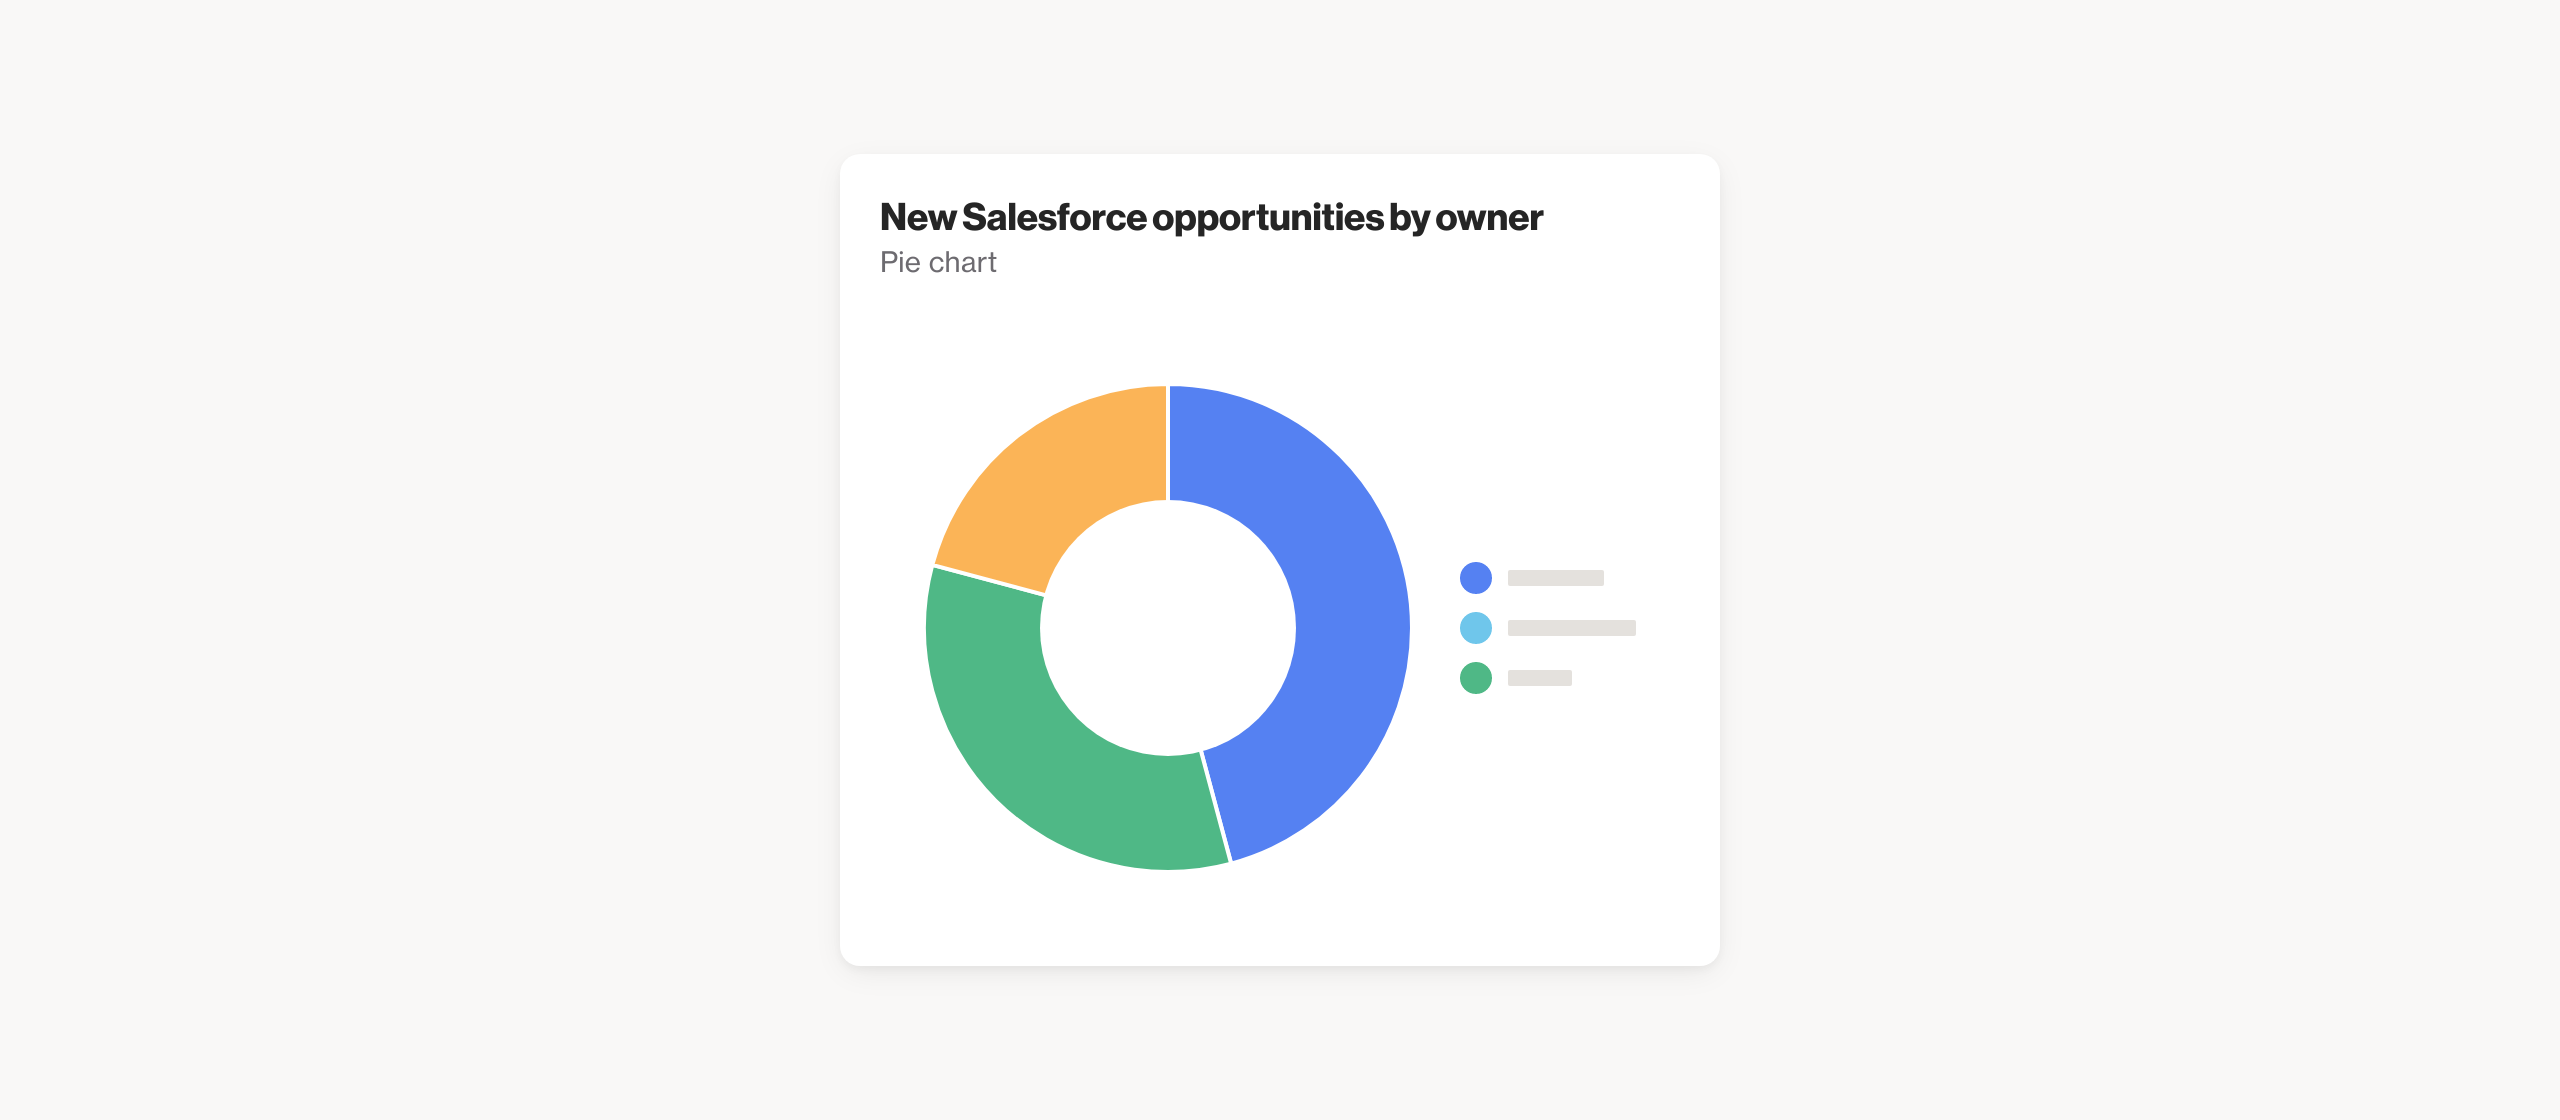 New Salesforce opportunities by owner